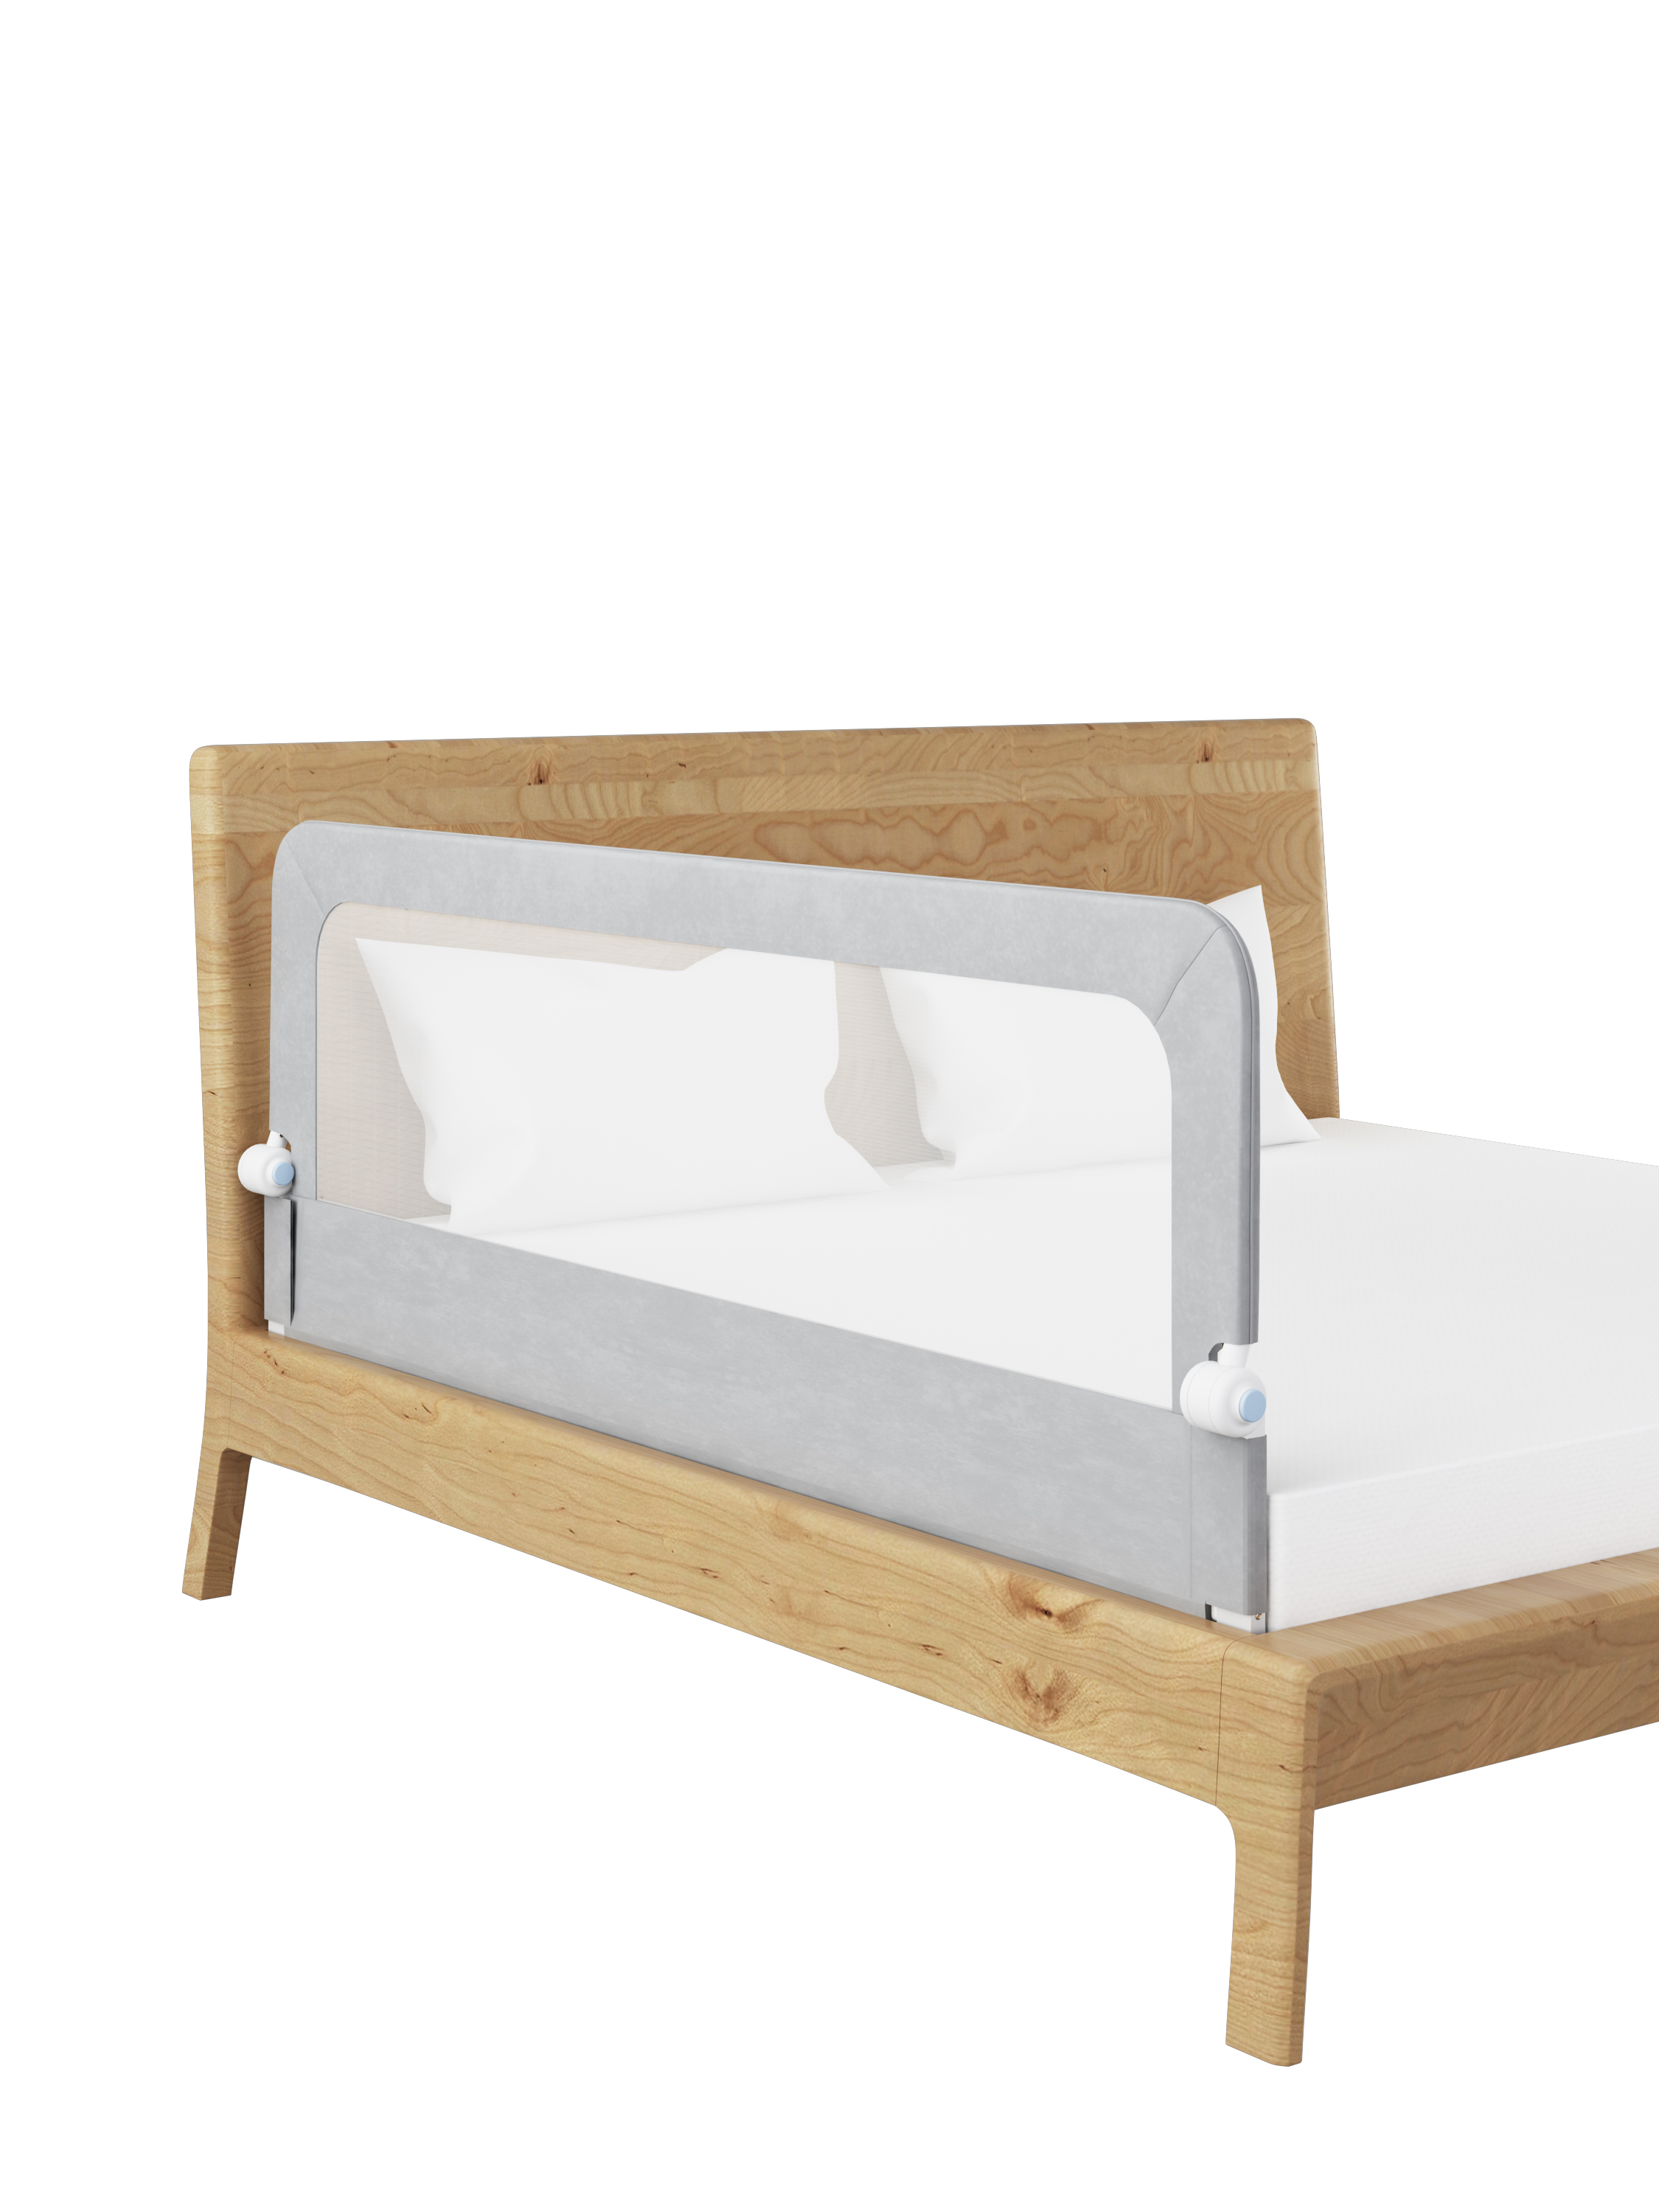 Bed Rail Guard For Baby